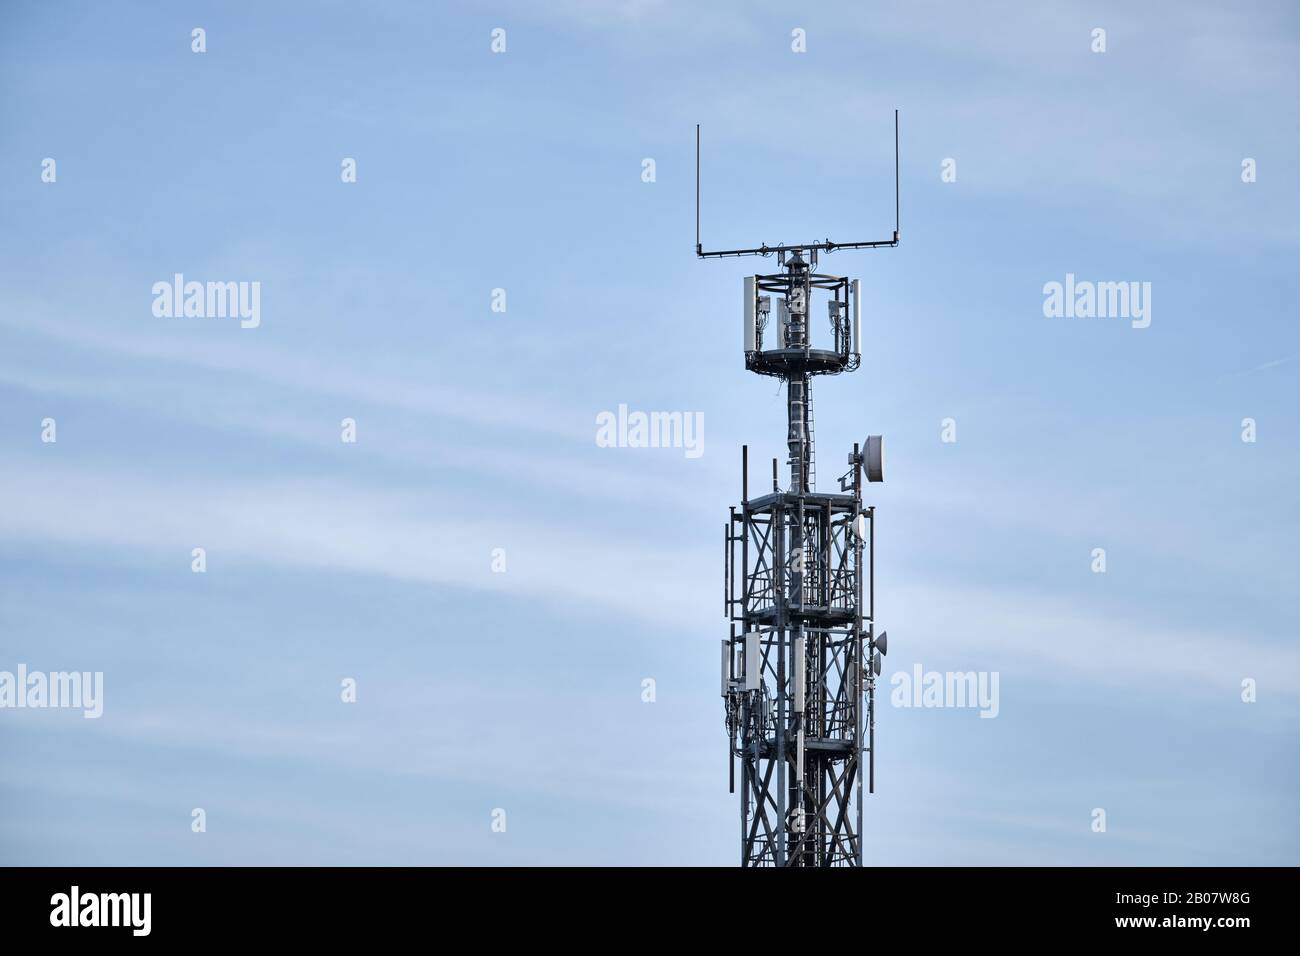 Close-up of lattice mast with base station for mobile communications against blue sky with clouds. Seen in Germany in February Stock Photo